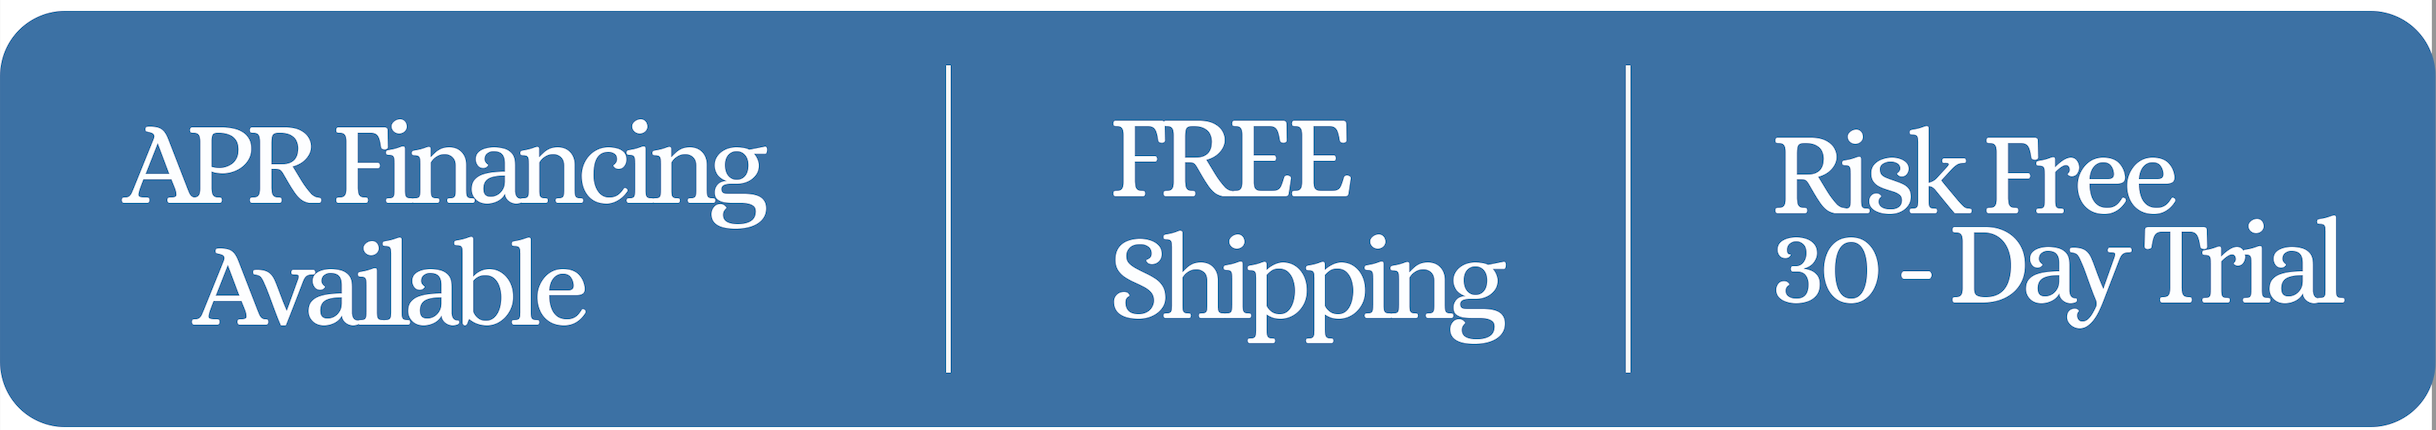 Financing | FREE Shipping | Risk Free, 30-Day Trial